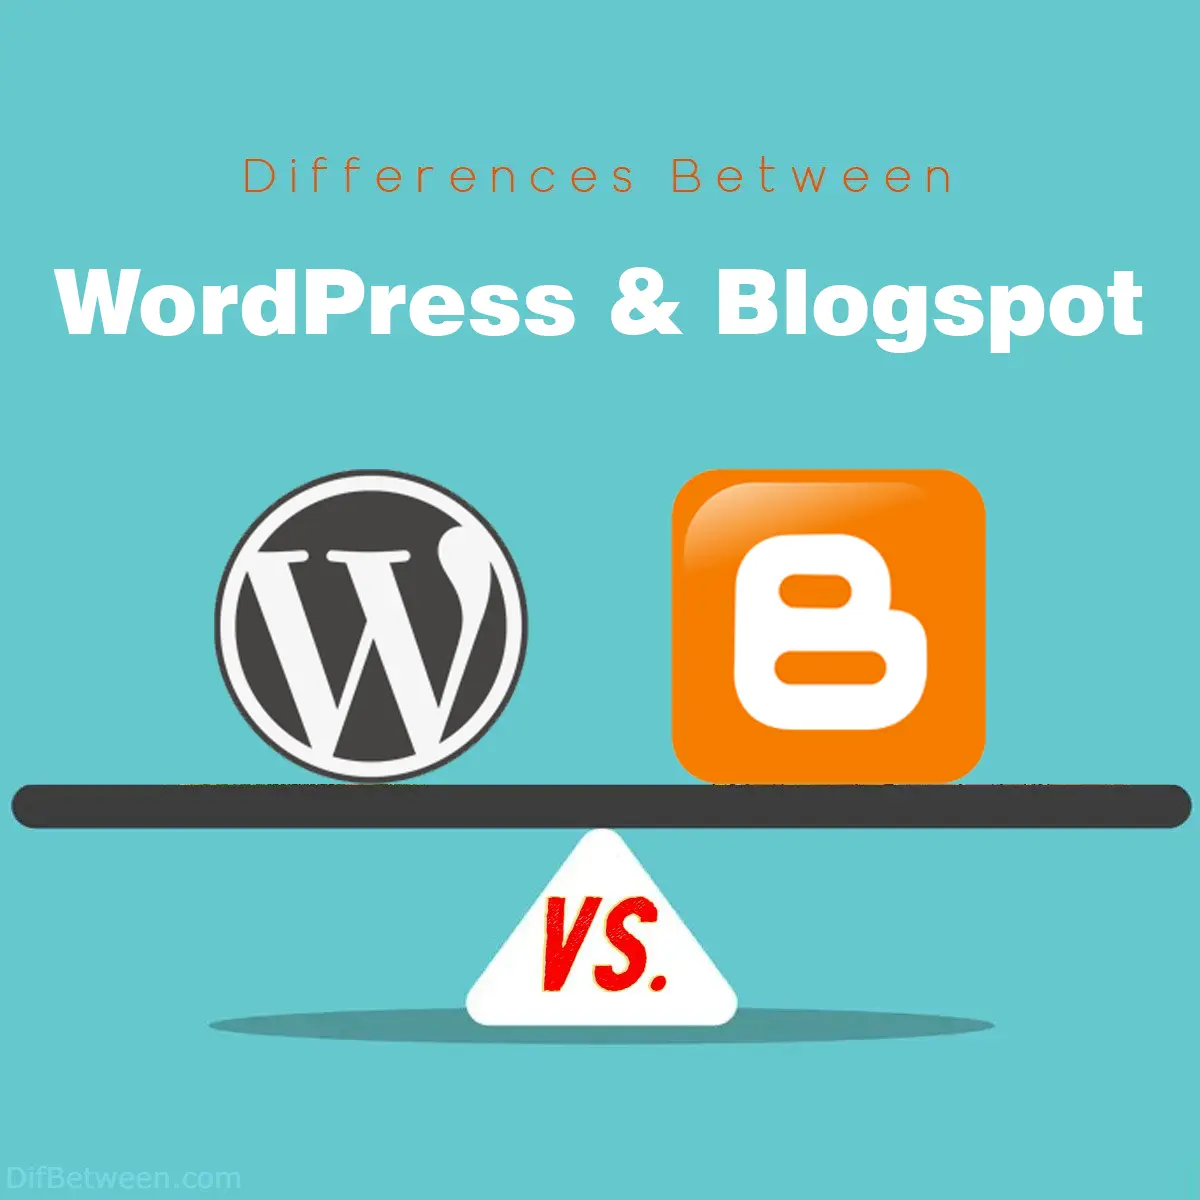 Differences Between WordPress and Blogspot